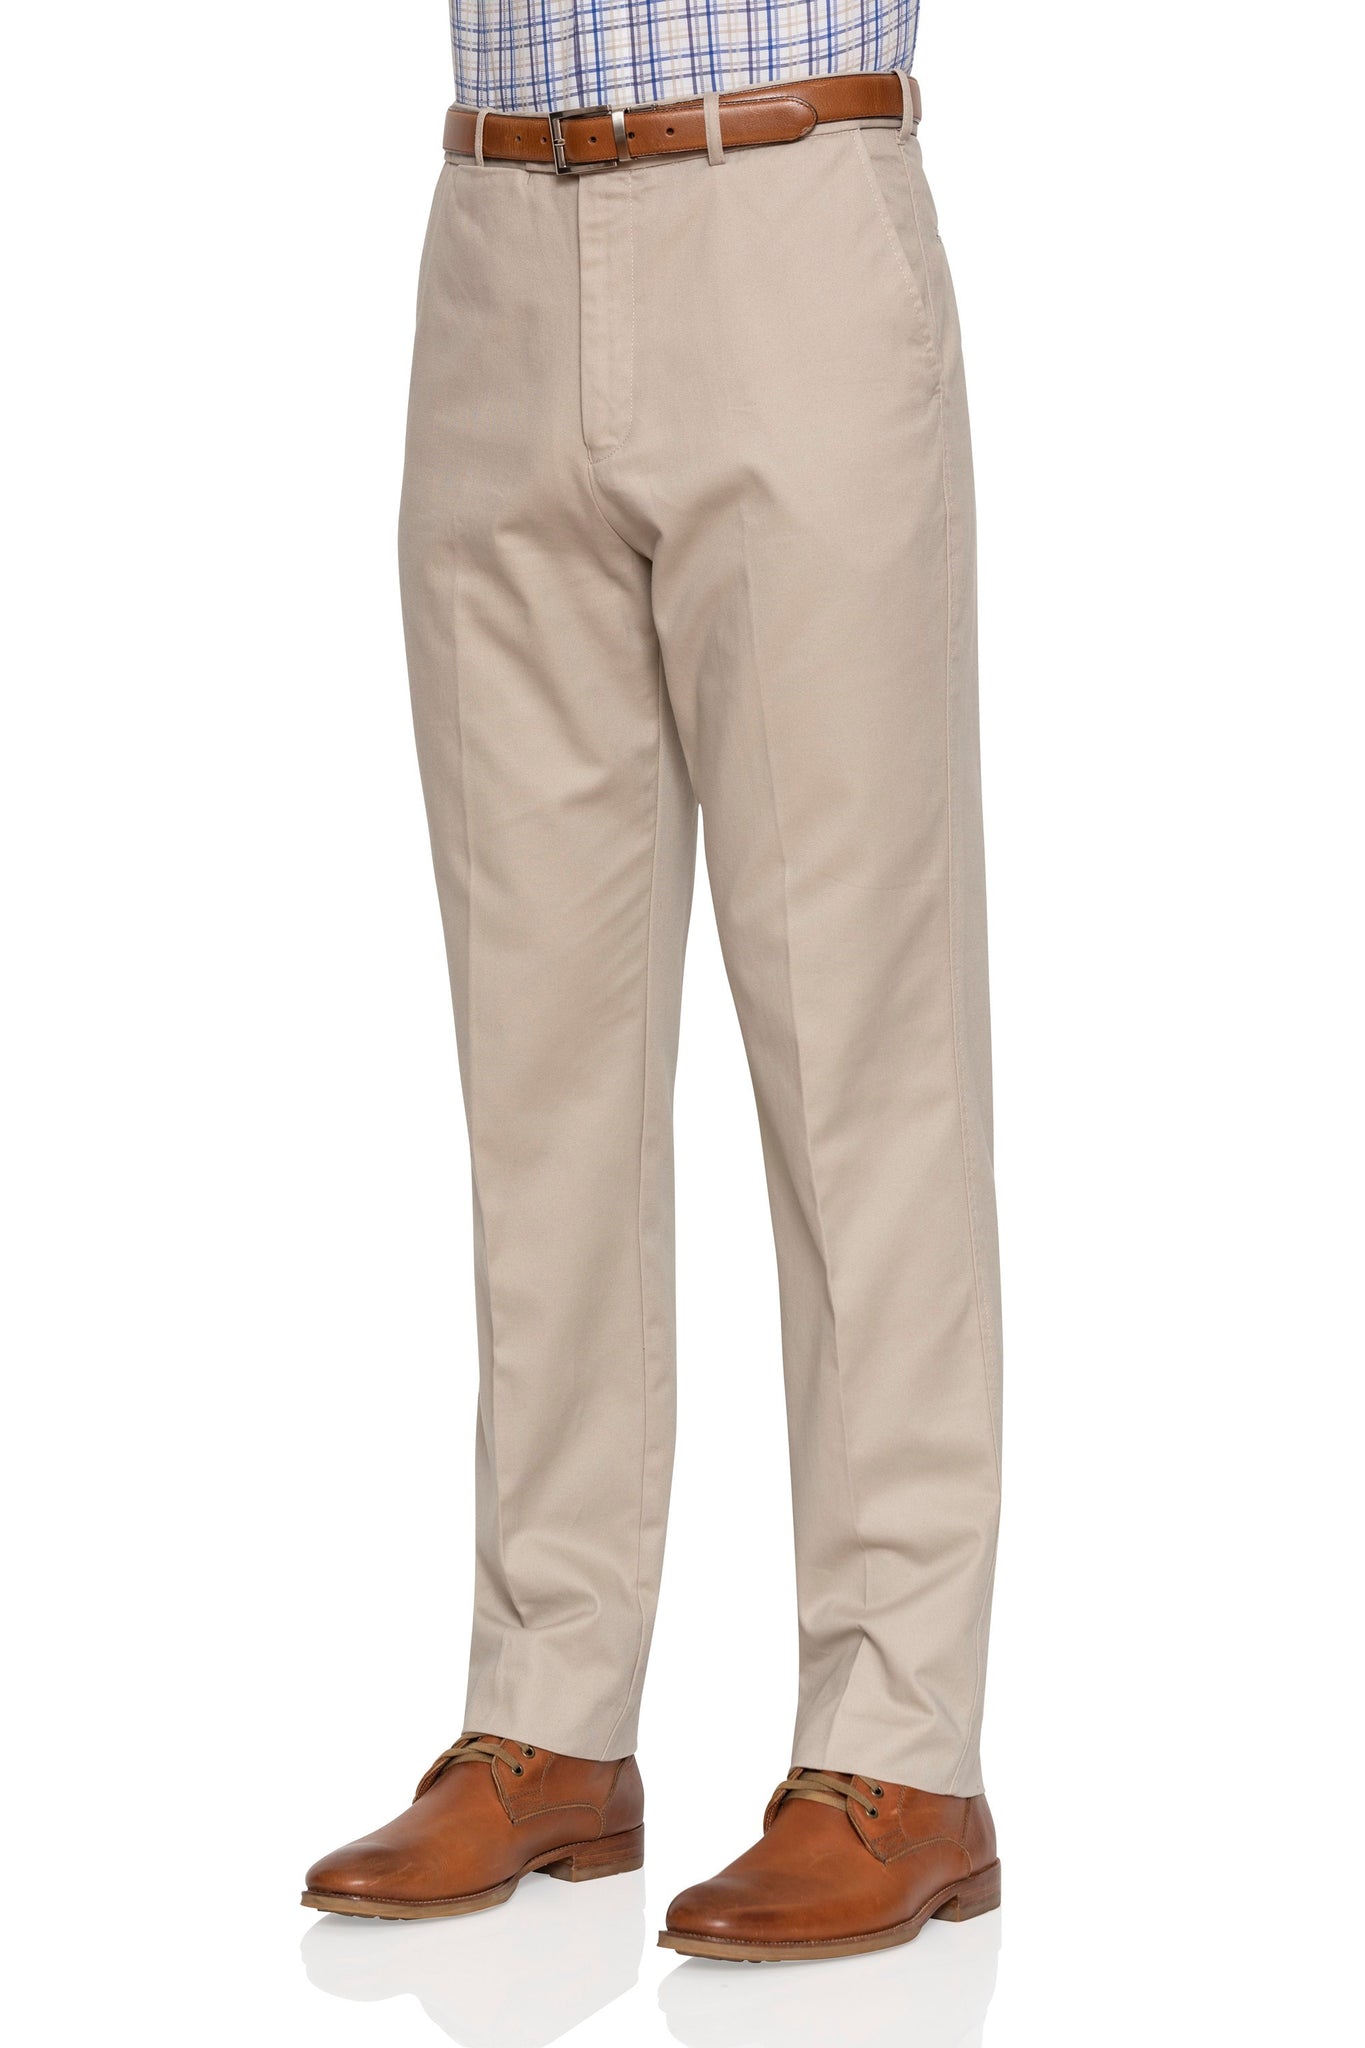 Women's Breathable Country Sport Trousers 500 Brown - Decathlon